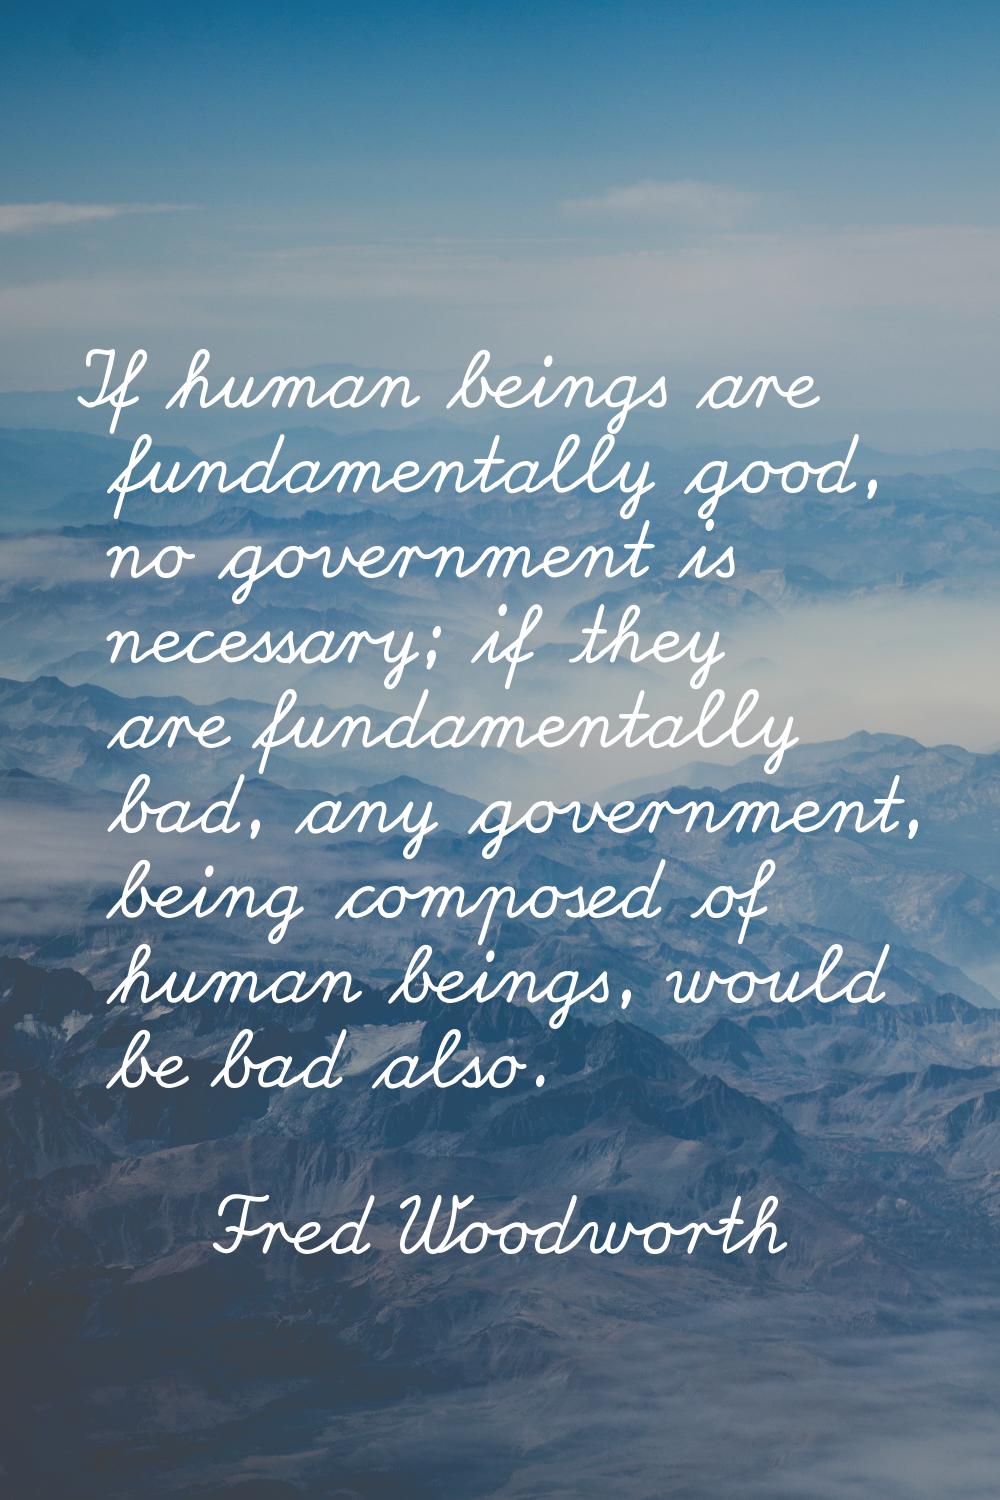 If human beings are fundamentally good, no government is necessary; if they are fundamentally bad, 